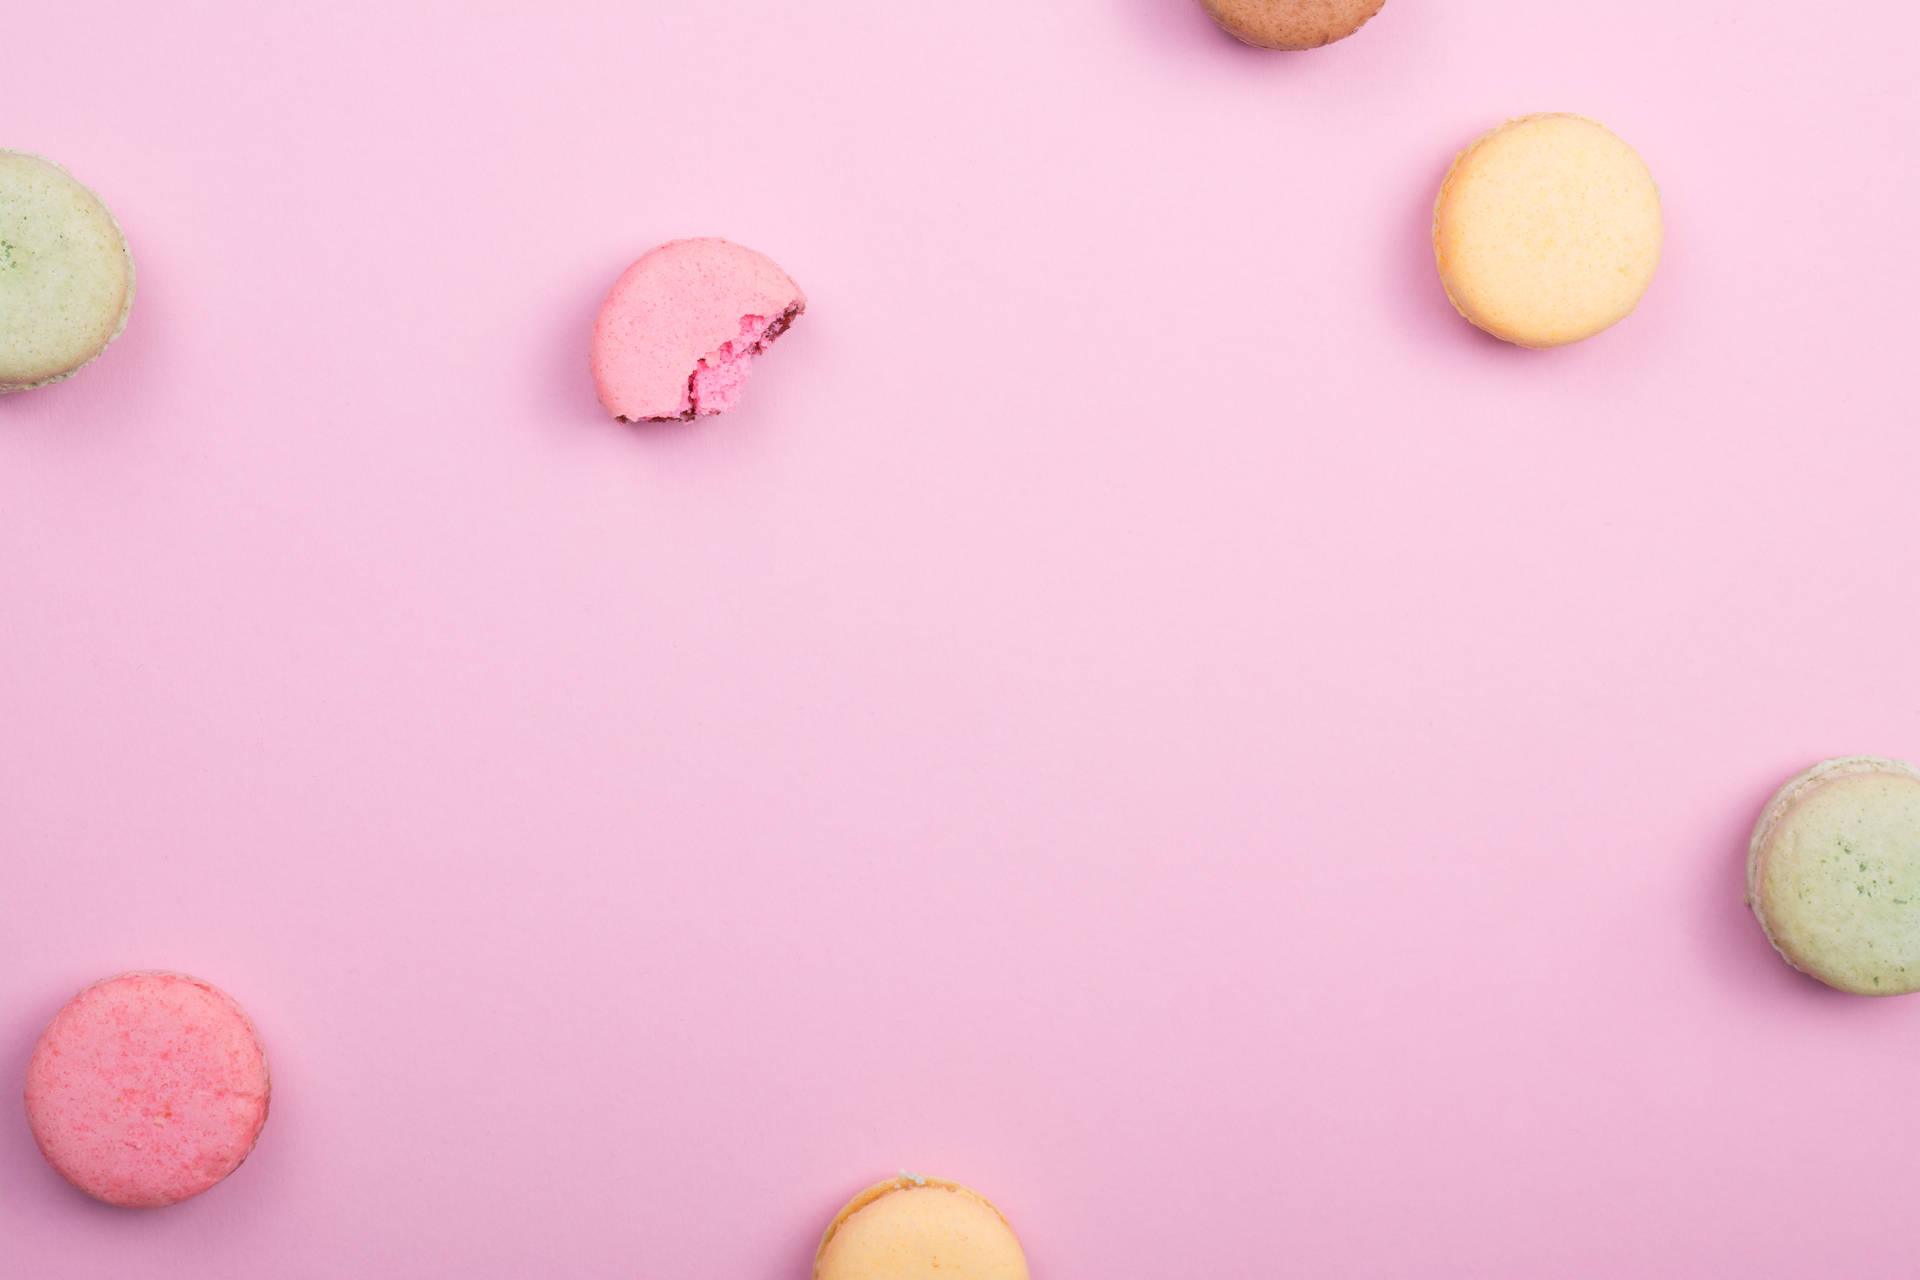 Macarons On Kawaii Pink Surface Picture